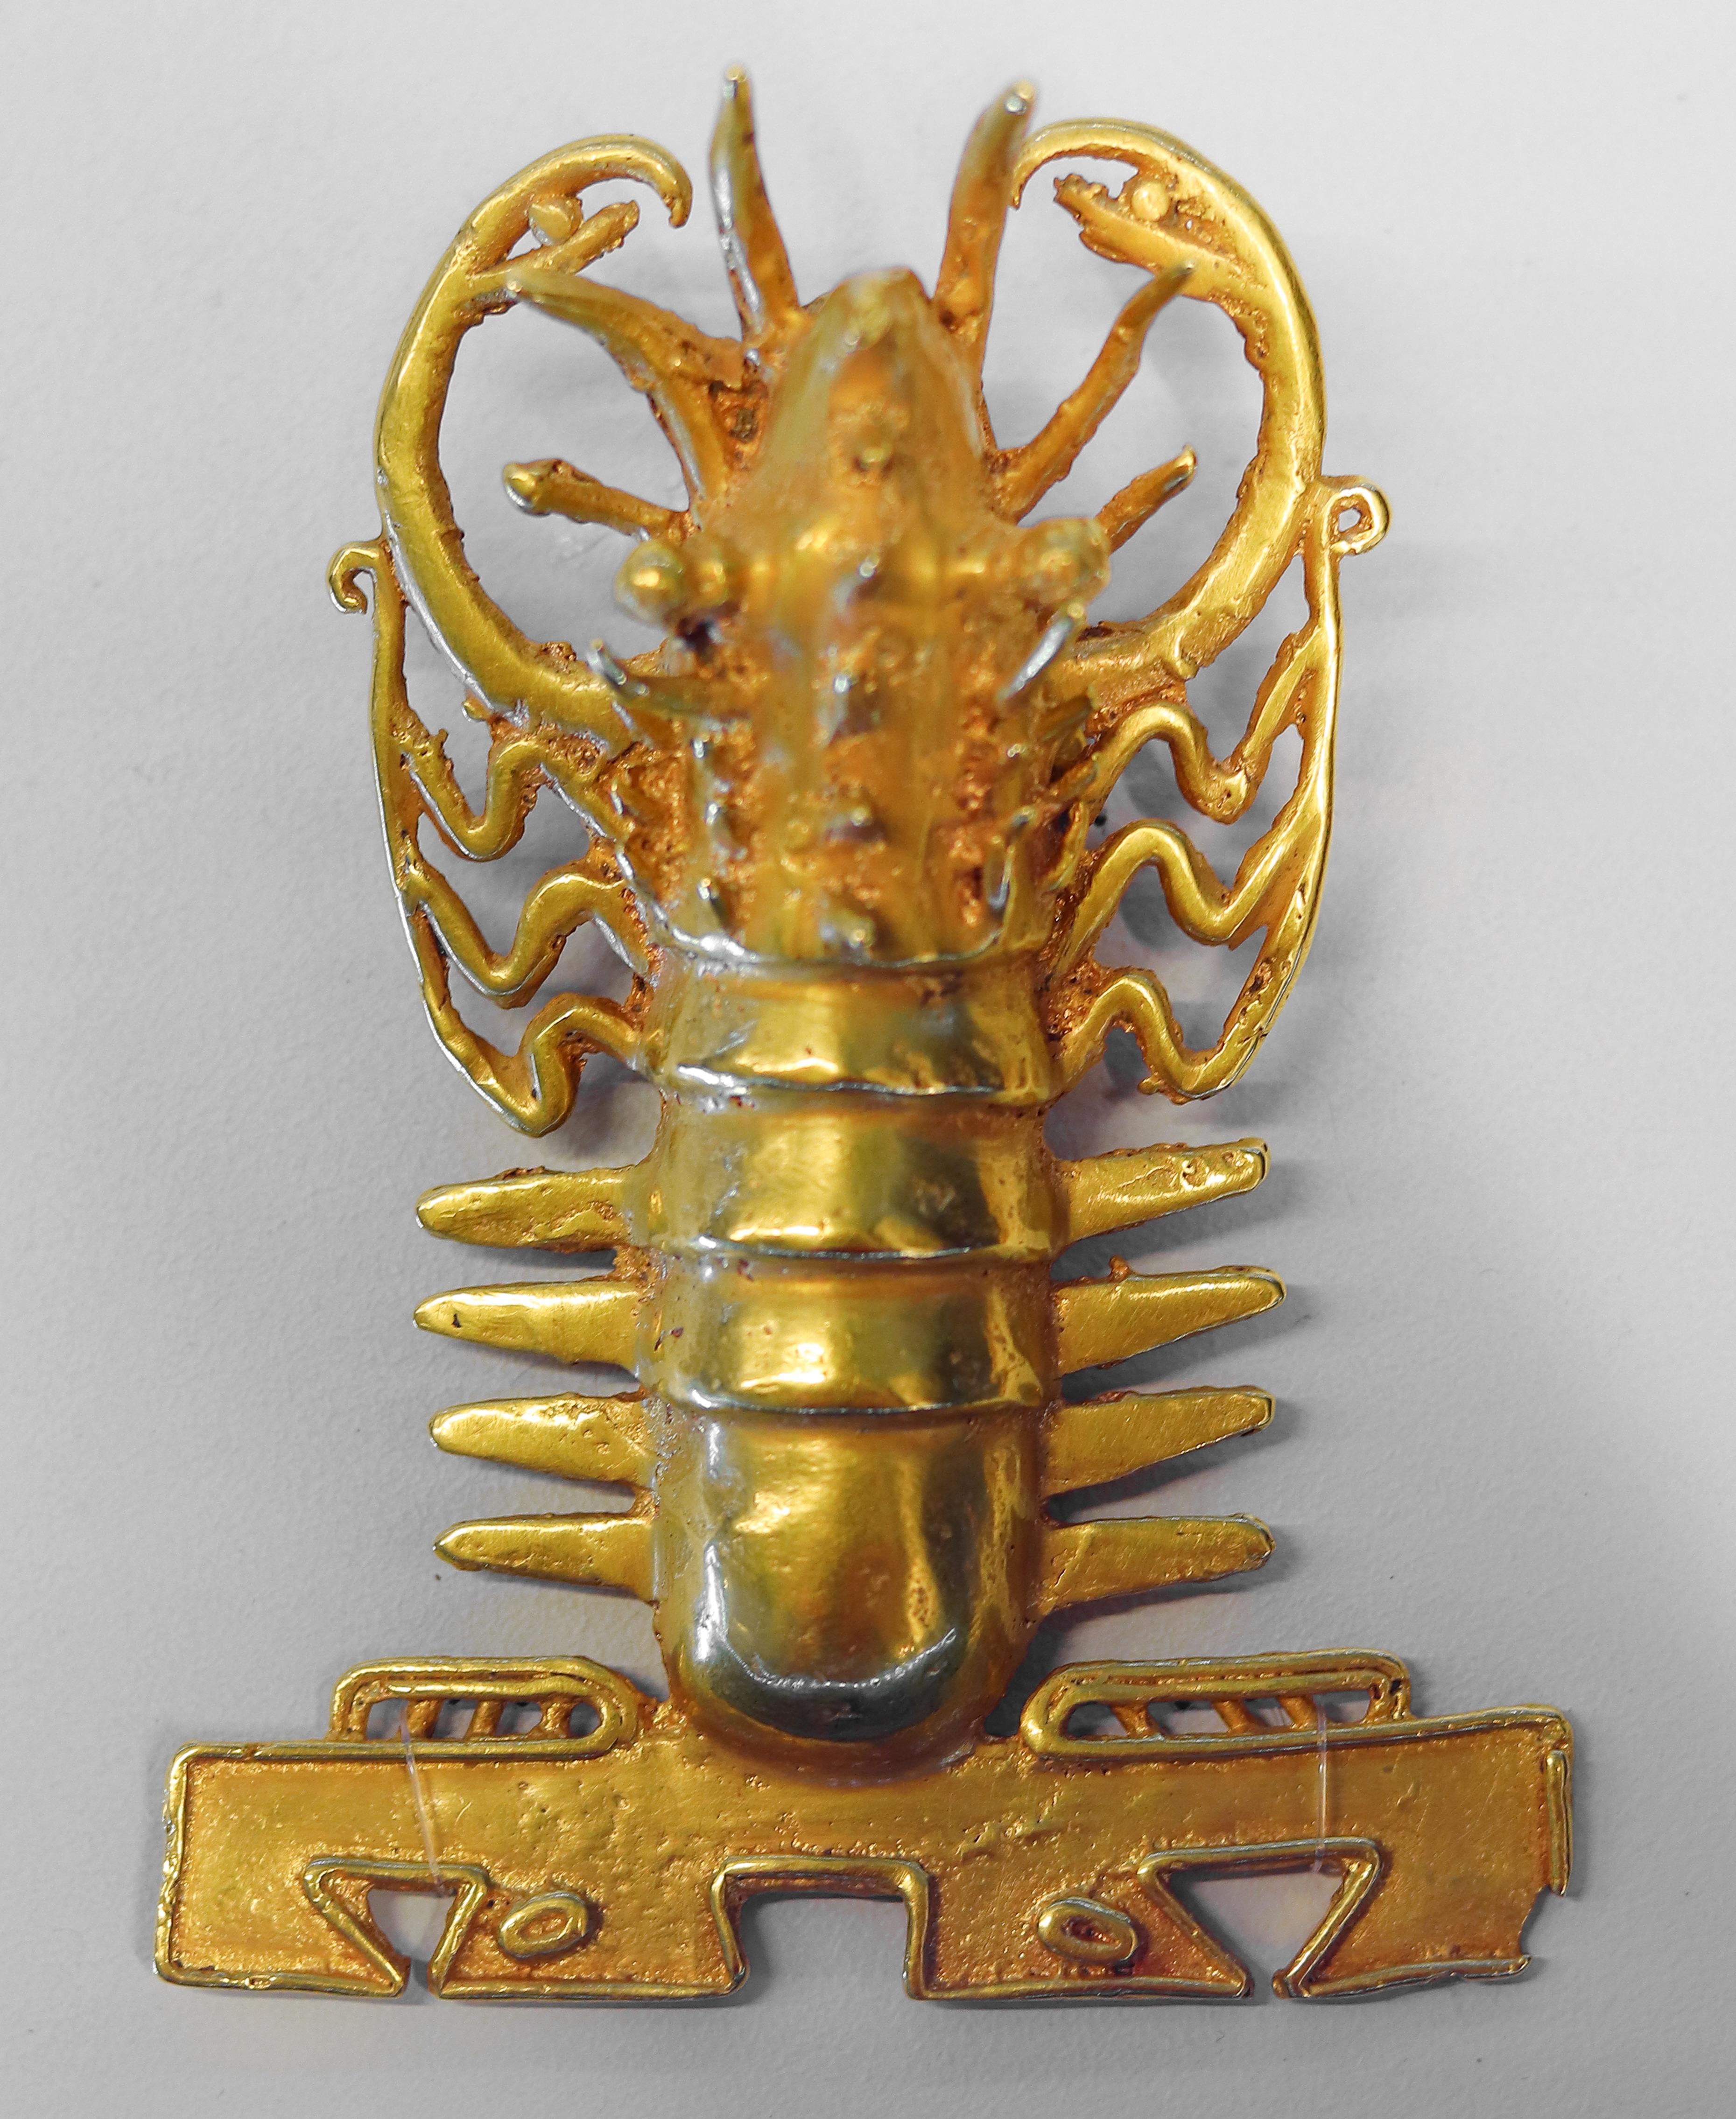 Gold Lobster. Pre Columbian Gold Museum of Costa Rica. Pacific shore of Costa Rica. 700 A.D..jpg